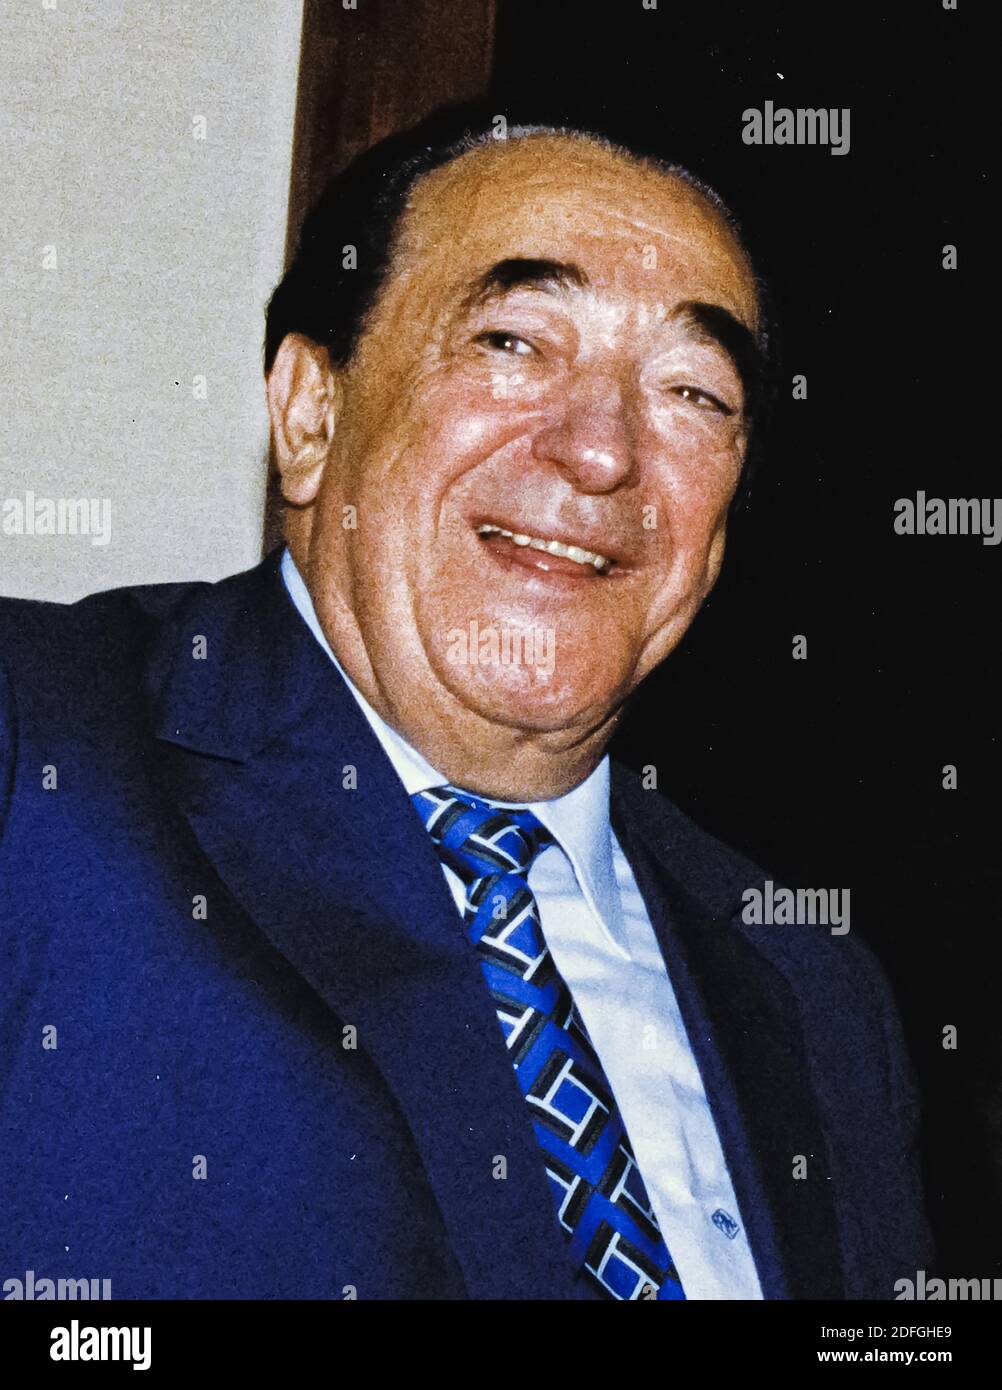 In this file photo from September 25, 1990, disgraced publisher Robert Maxwell, meets South African Ambassador to the United States Piet G.J. Koornhof in Washington, DC on September 25, 1990. The New York Post is reporting today that Maxwell, through his daughter Ghislaine Maxwell, may have been the source the huge fortune amassed by alleged pedophile Jeffrey Epstein, who hanged himself in his Manhattan lockup last August. Photo by Ron Sachs/CNP/ABACAPRESS.COM Stock Photo